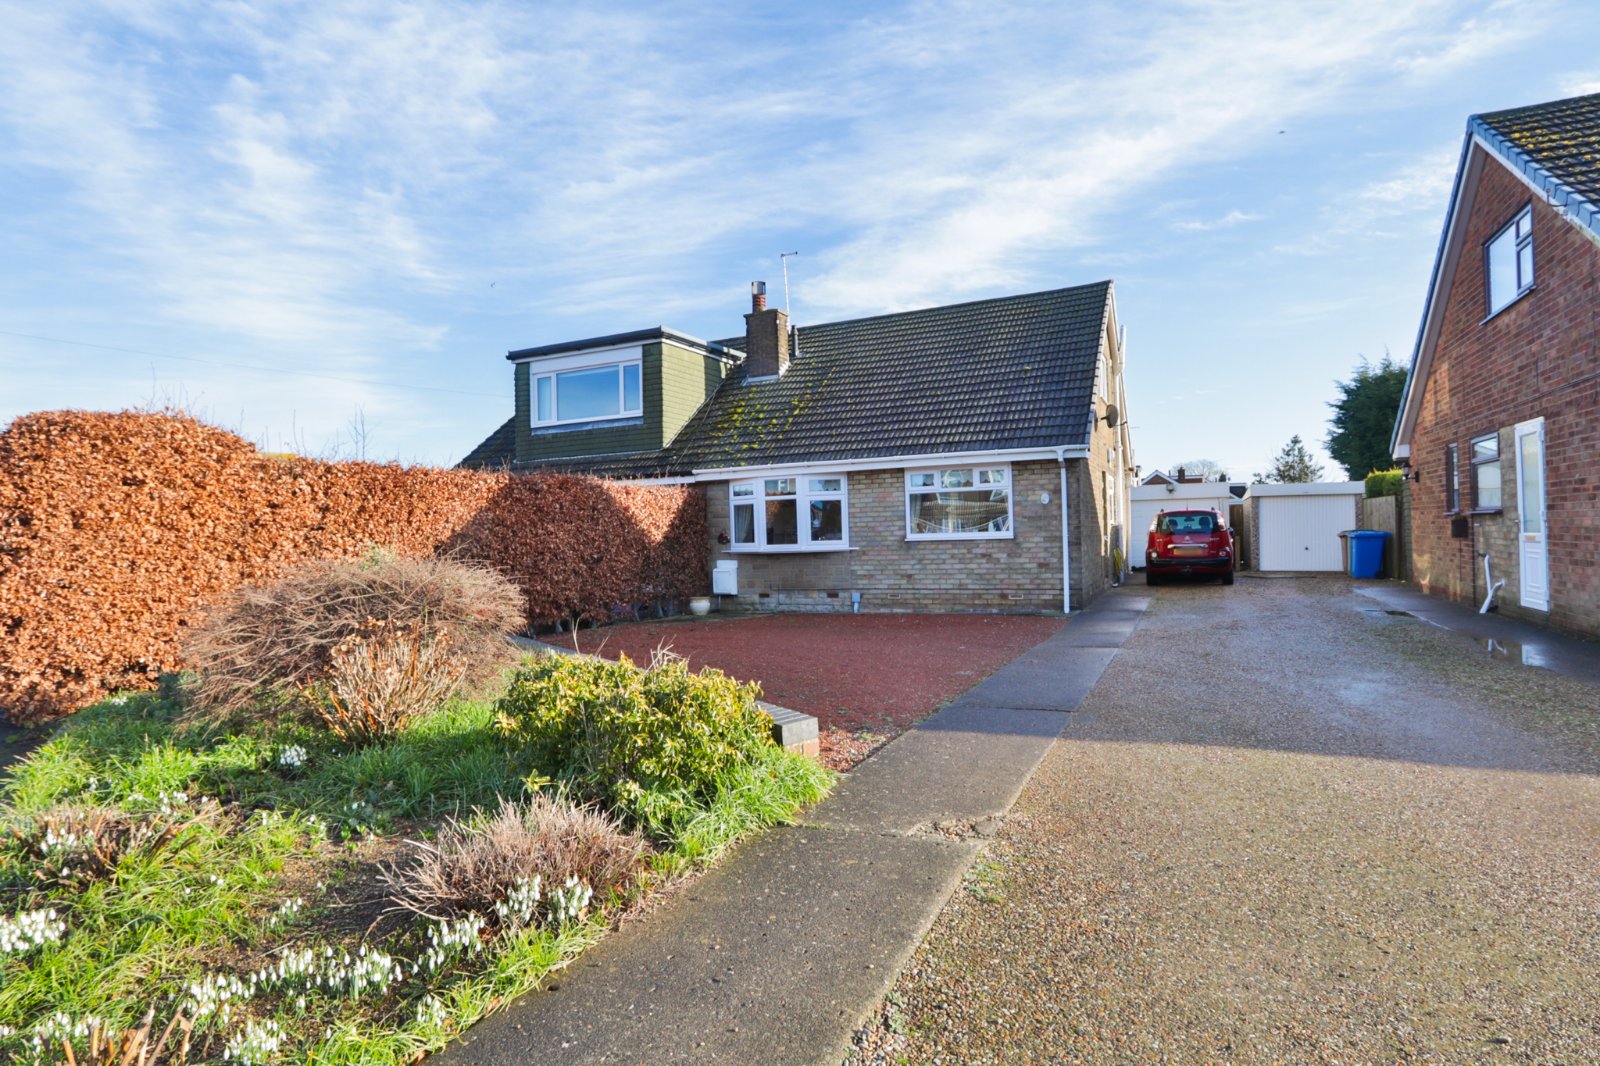 2 bed bungalow for sale in Church Lane, Thorngumbald, HU12